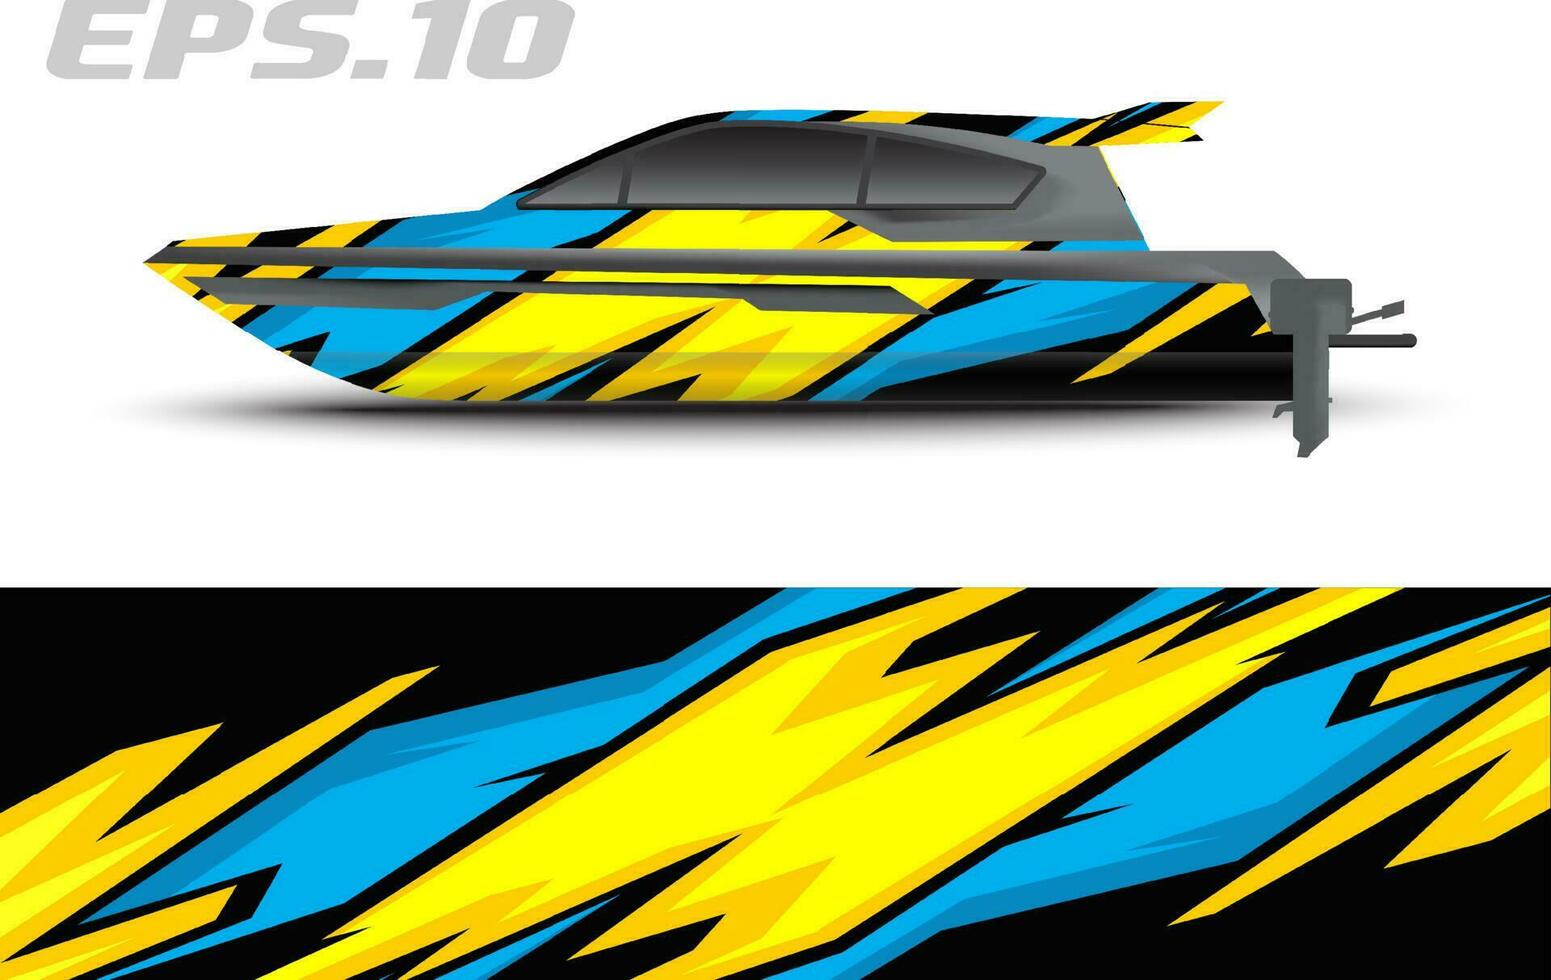 Boat livery vector graphics. Abstract racing background design for car, motorcycle and other vehicle sticker wrap